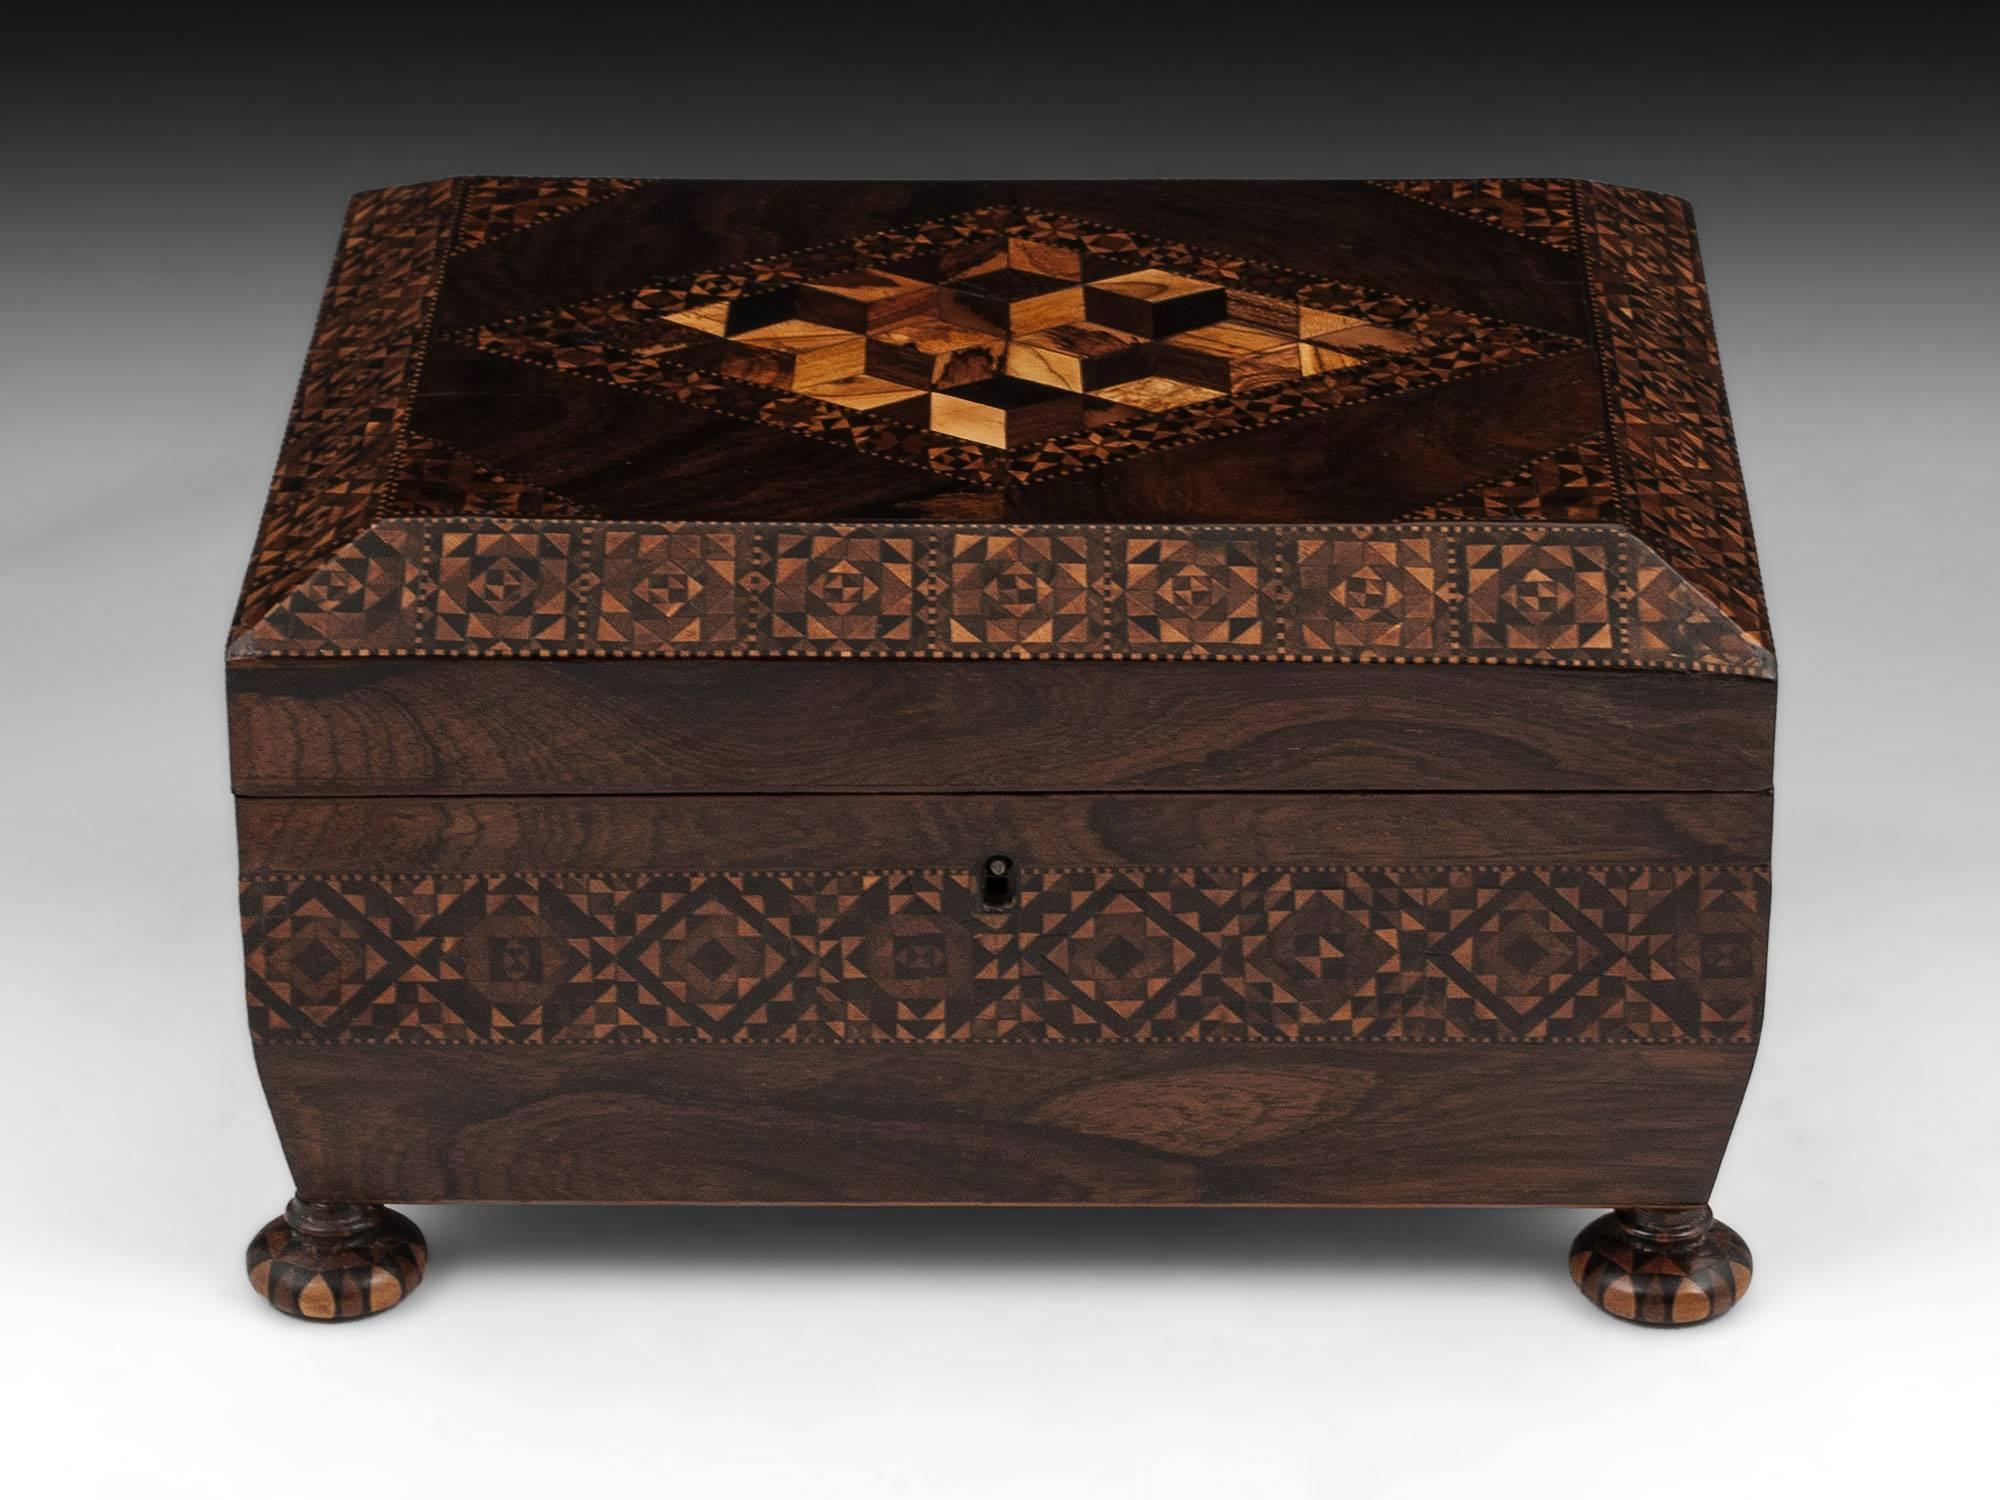 Antique Tunbridge Ware Sewing Box veneered in mahogany with perspective cube diamond design on the top and stands on four turned stick ware wooden feet. 

The interior features a removable sewing tray which has a large storage space underneath. The